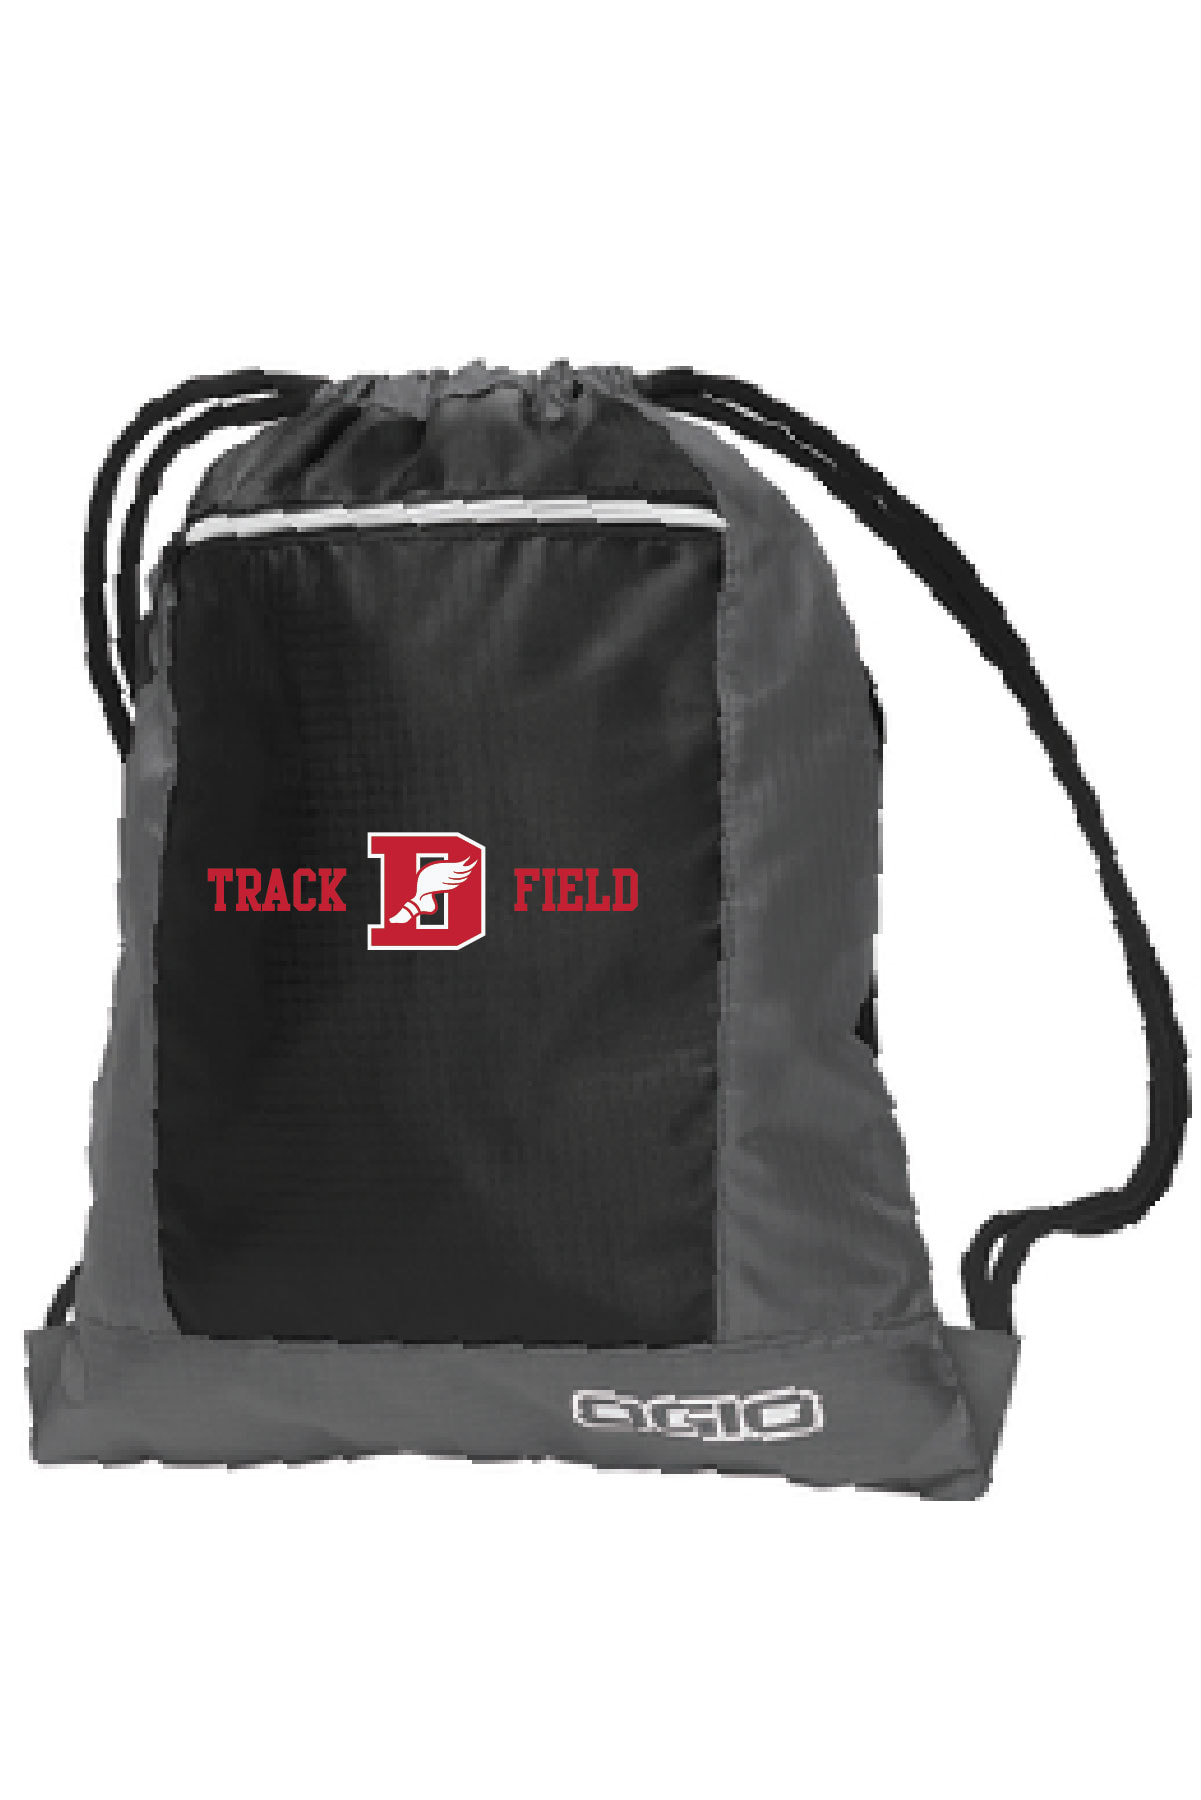 Track and Field Sprint' Computer Backpack | Spreadshirt